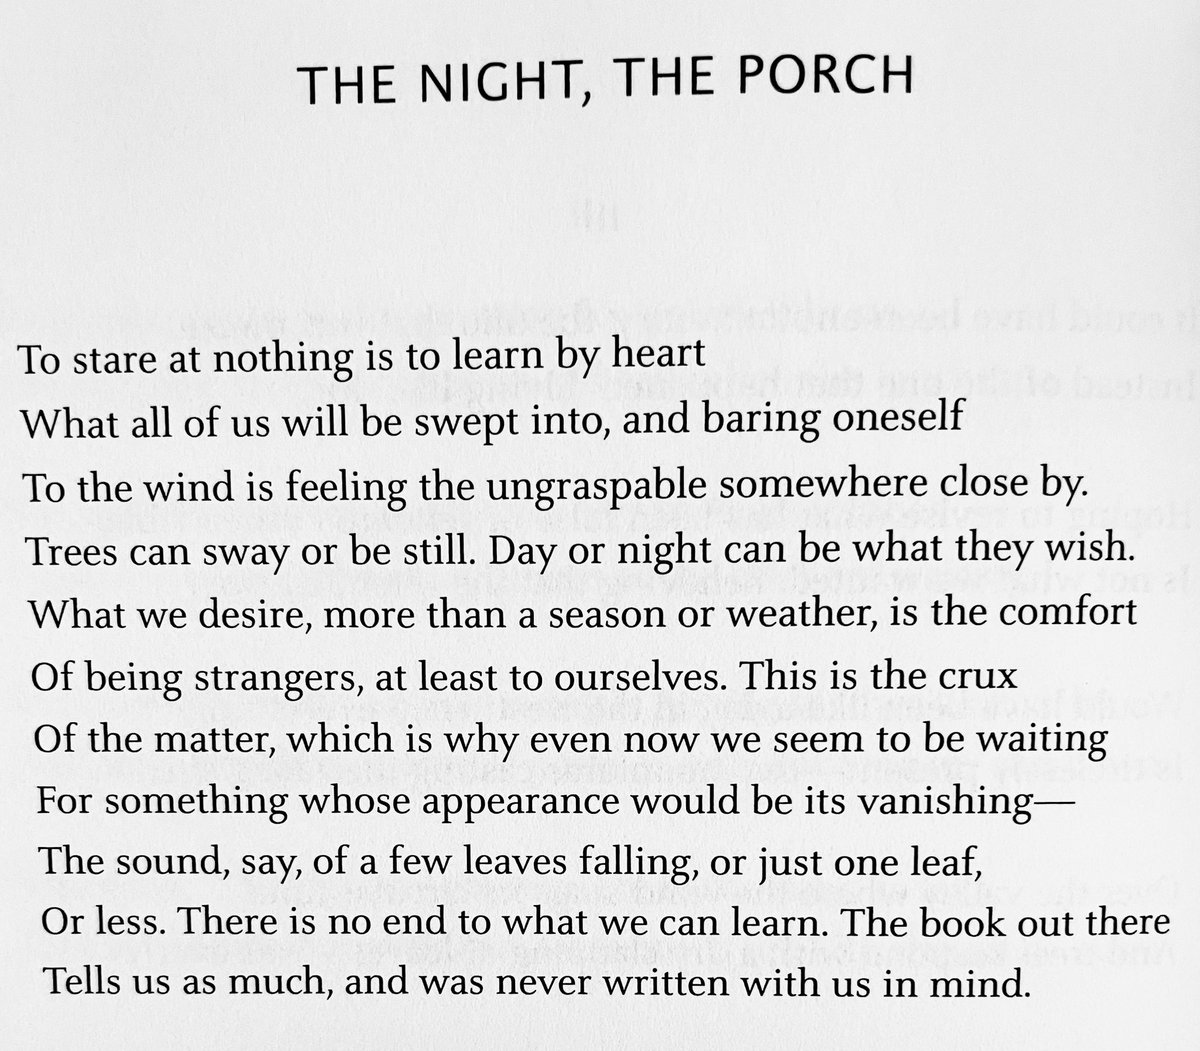 “ . . . even now we seem to be waiting / For something whose appearance would be its vanishing—” For Mark Strand’s birthday